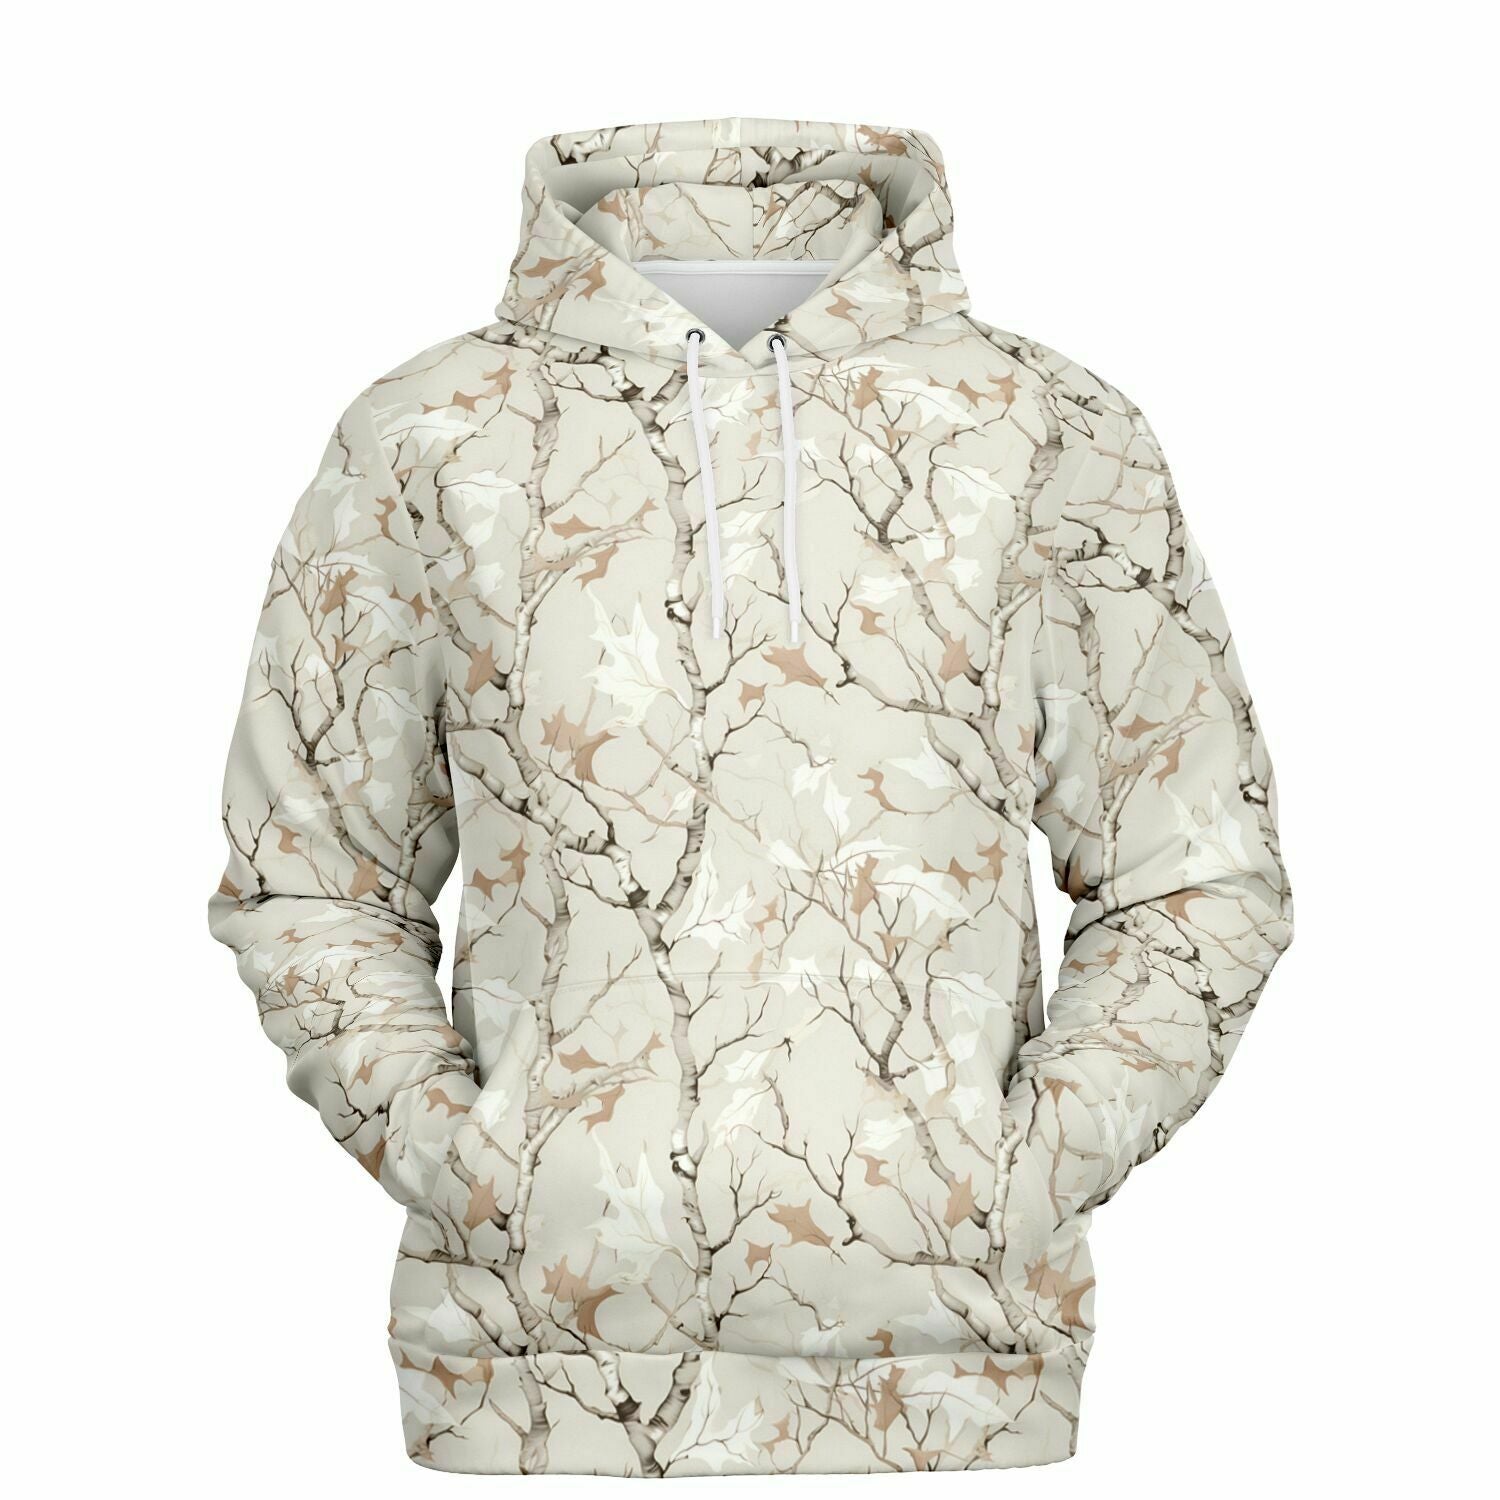 Real Camo Hoodie, Off White Cream Fall Leaf Camouflage Pullover Men Women Adult Aesthetic Graphic Cotton Hooded Sweatshirt Pockets Starcove Fashion